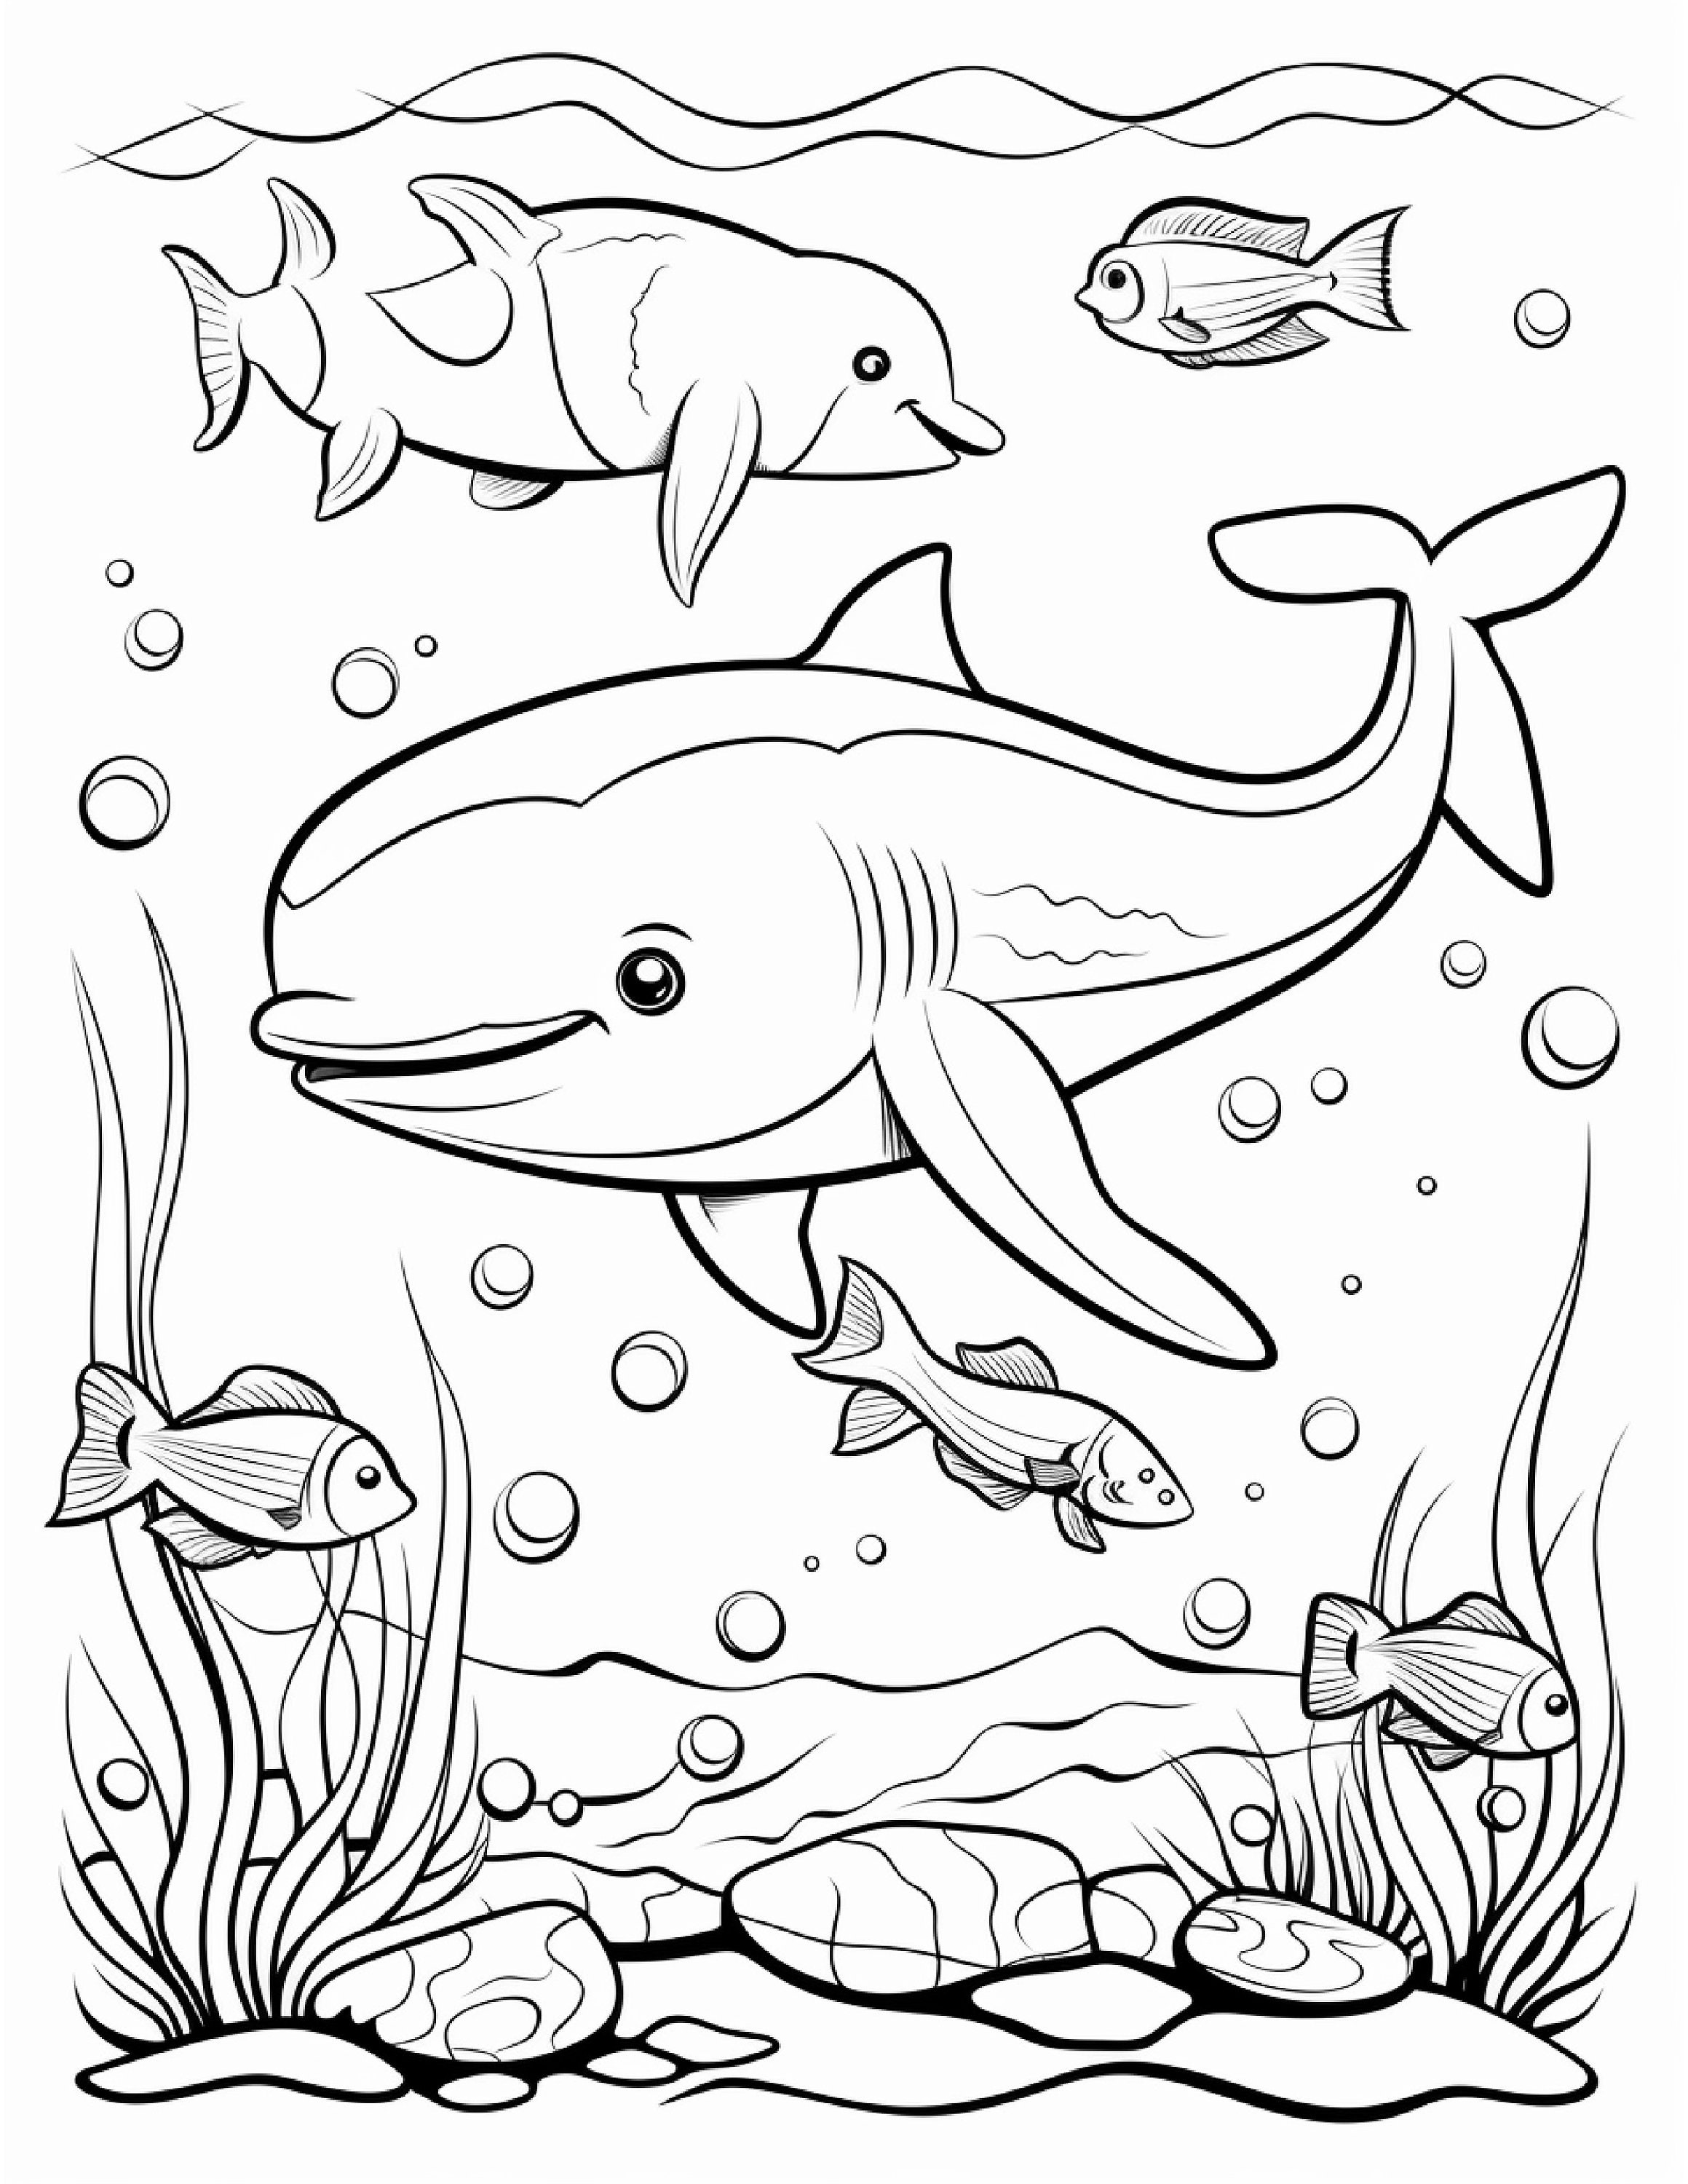 Coloring Book Sea Animals 1-10 Pages - Etsy